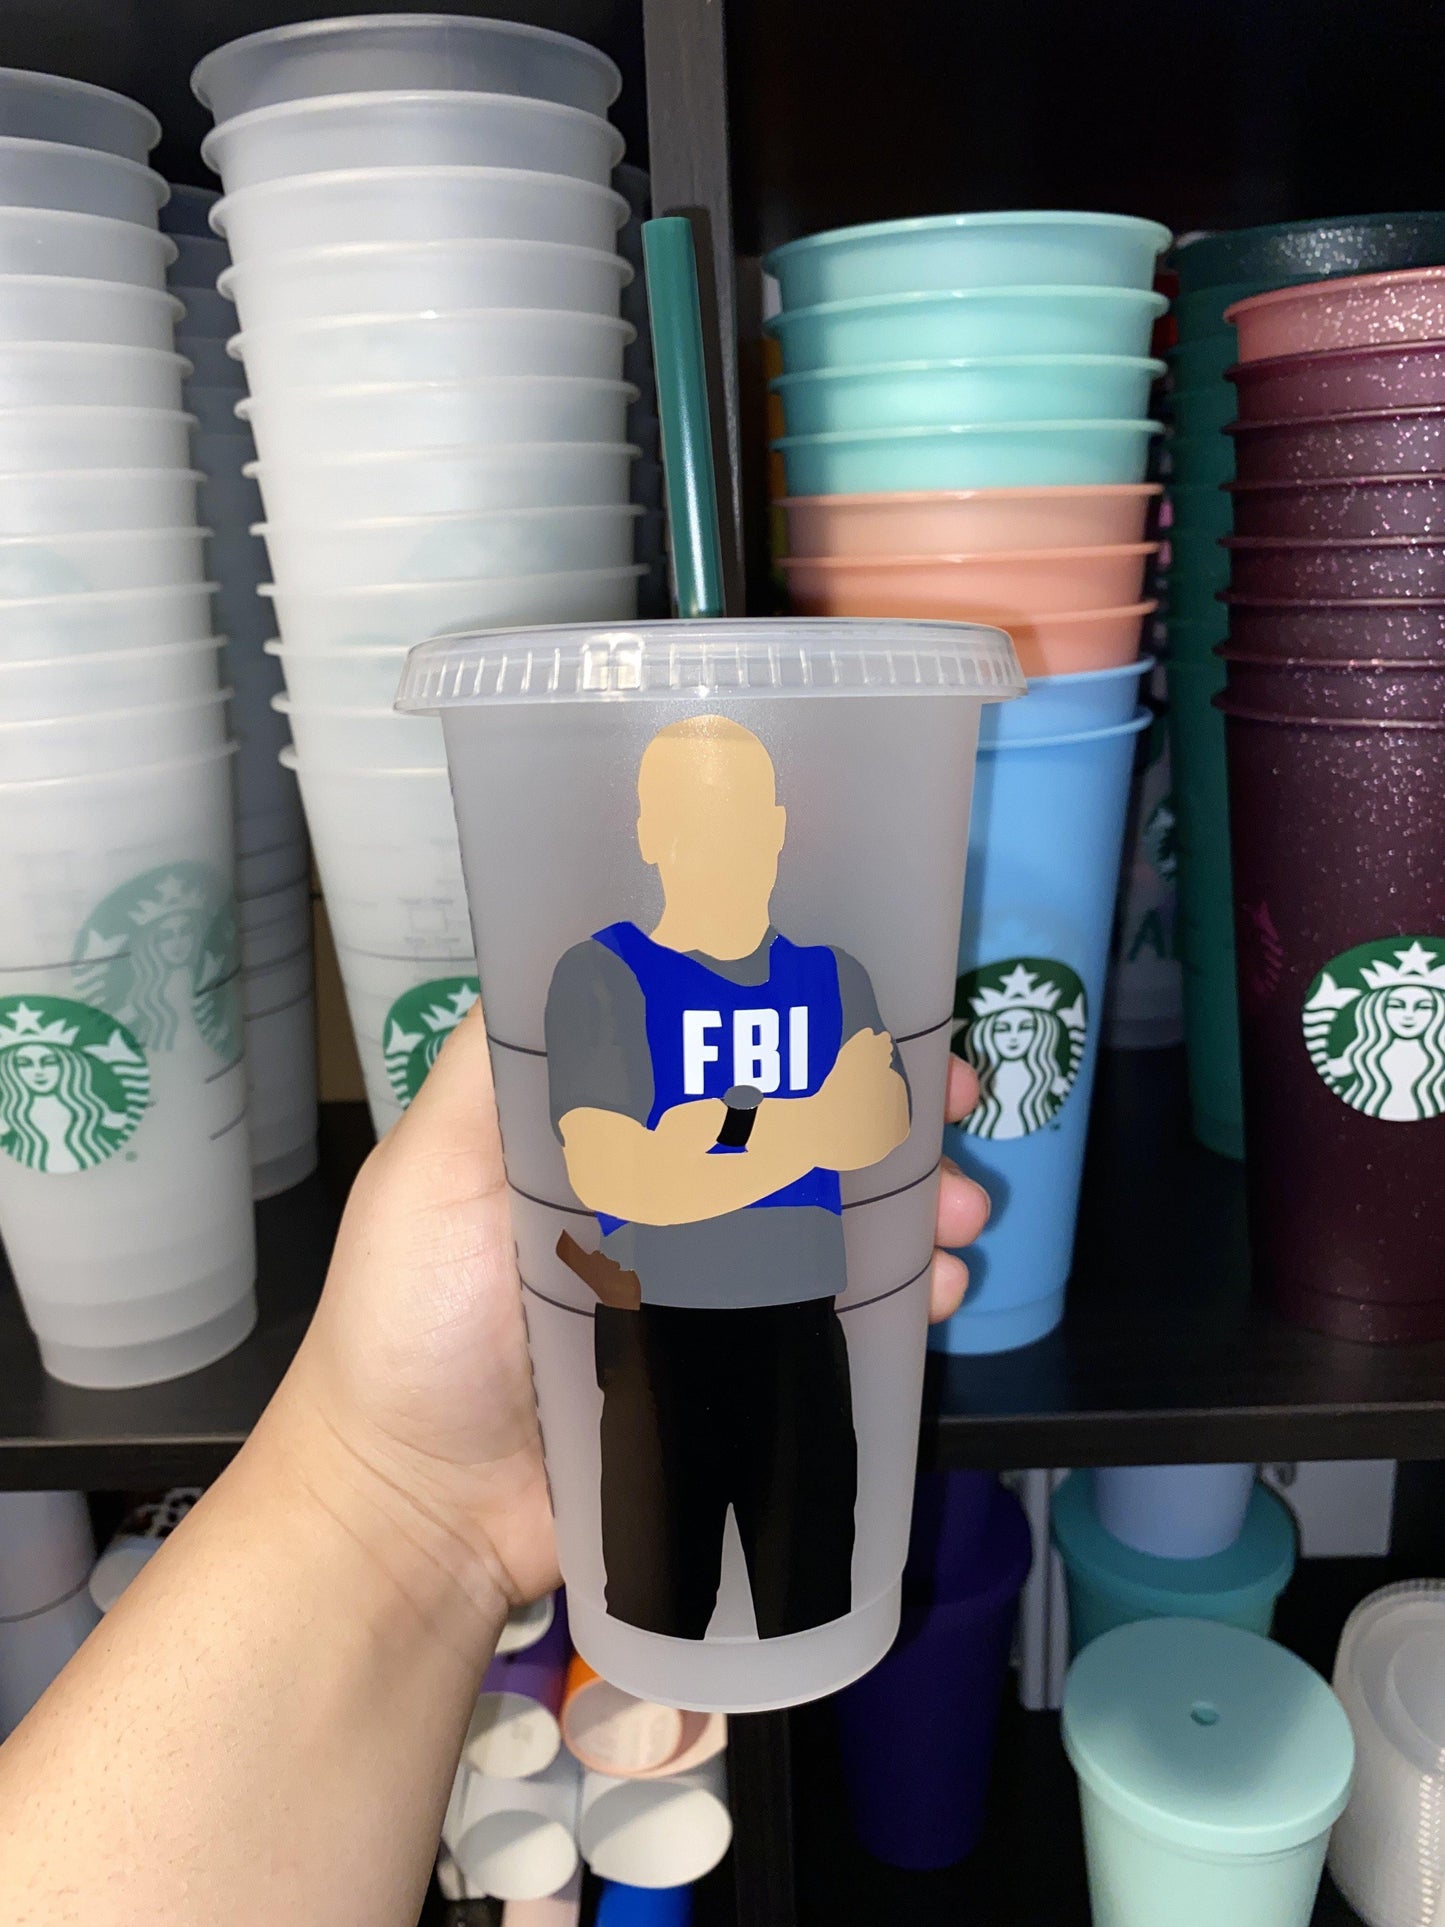 Derek Morgan Criminal Minds Starbucks Frosted Cup. Custom Starbucks Hot and Cold cups. Choose from over 100 designs and colour combinations or customize your own. Toronto, ON, Canada. Ship Worldwide.